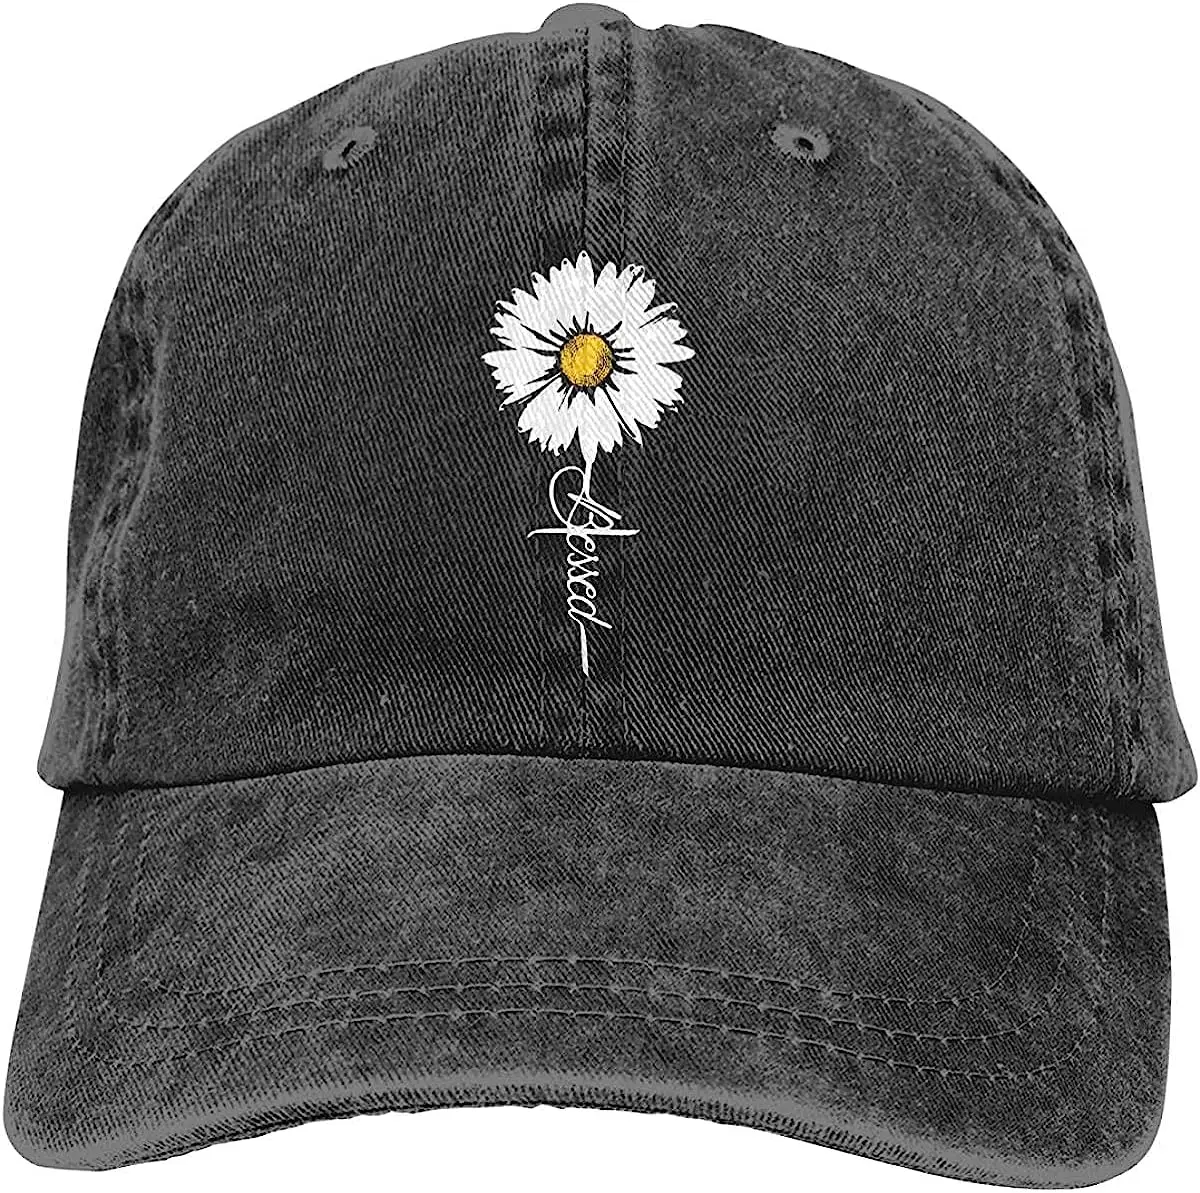 

Hot Fashion Casual Funny Adjustable Size Distressed Blessed Faith Hat Vintage Washed Baseball Cap For Men Women Travel Gift